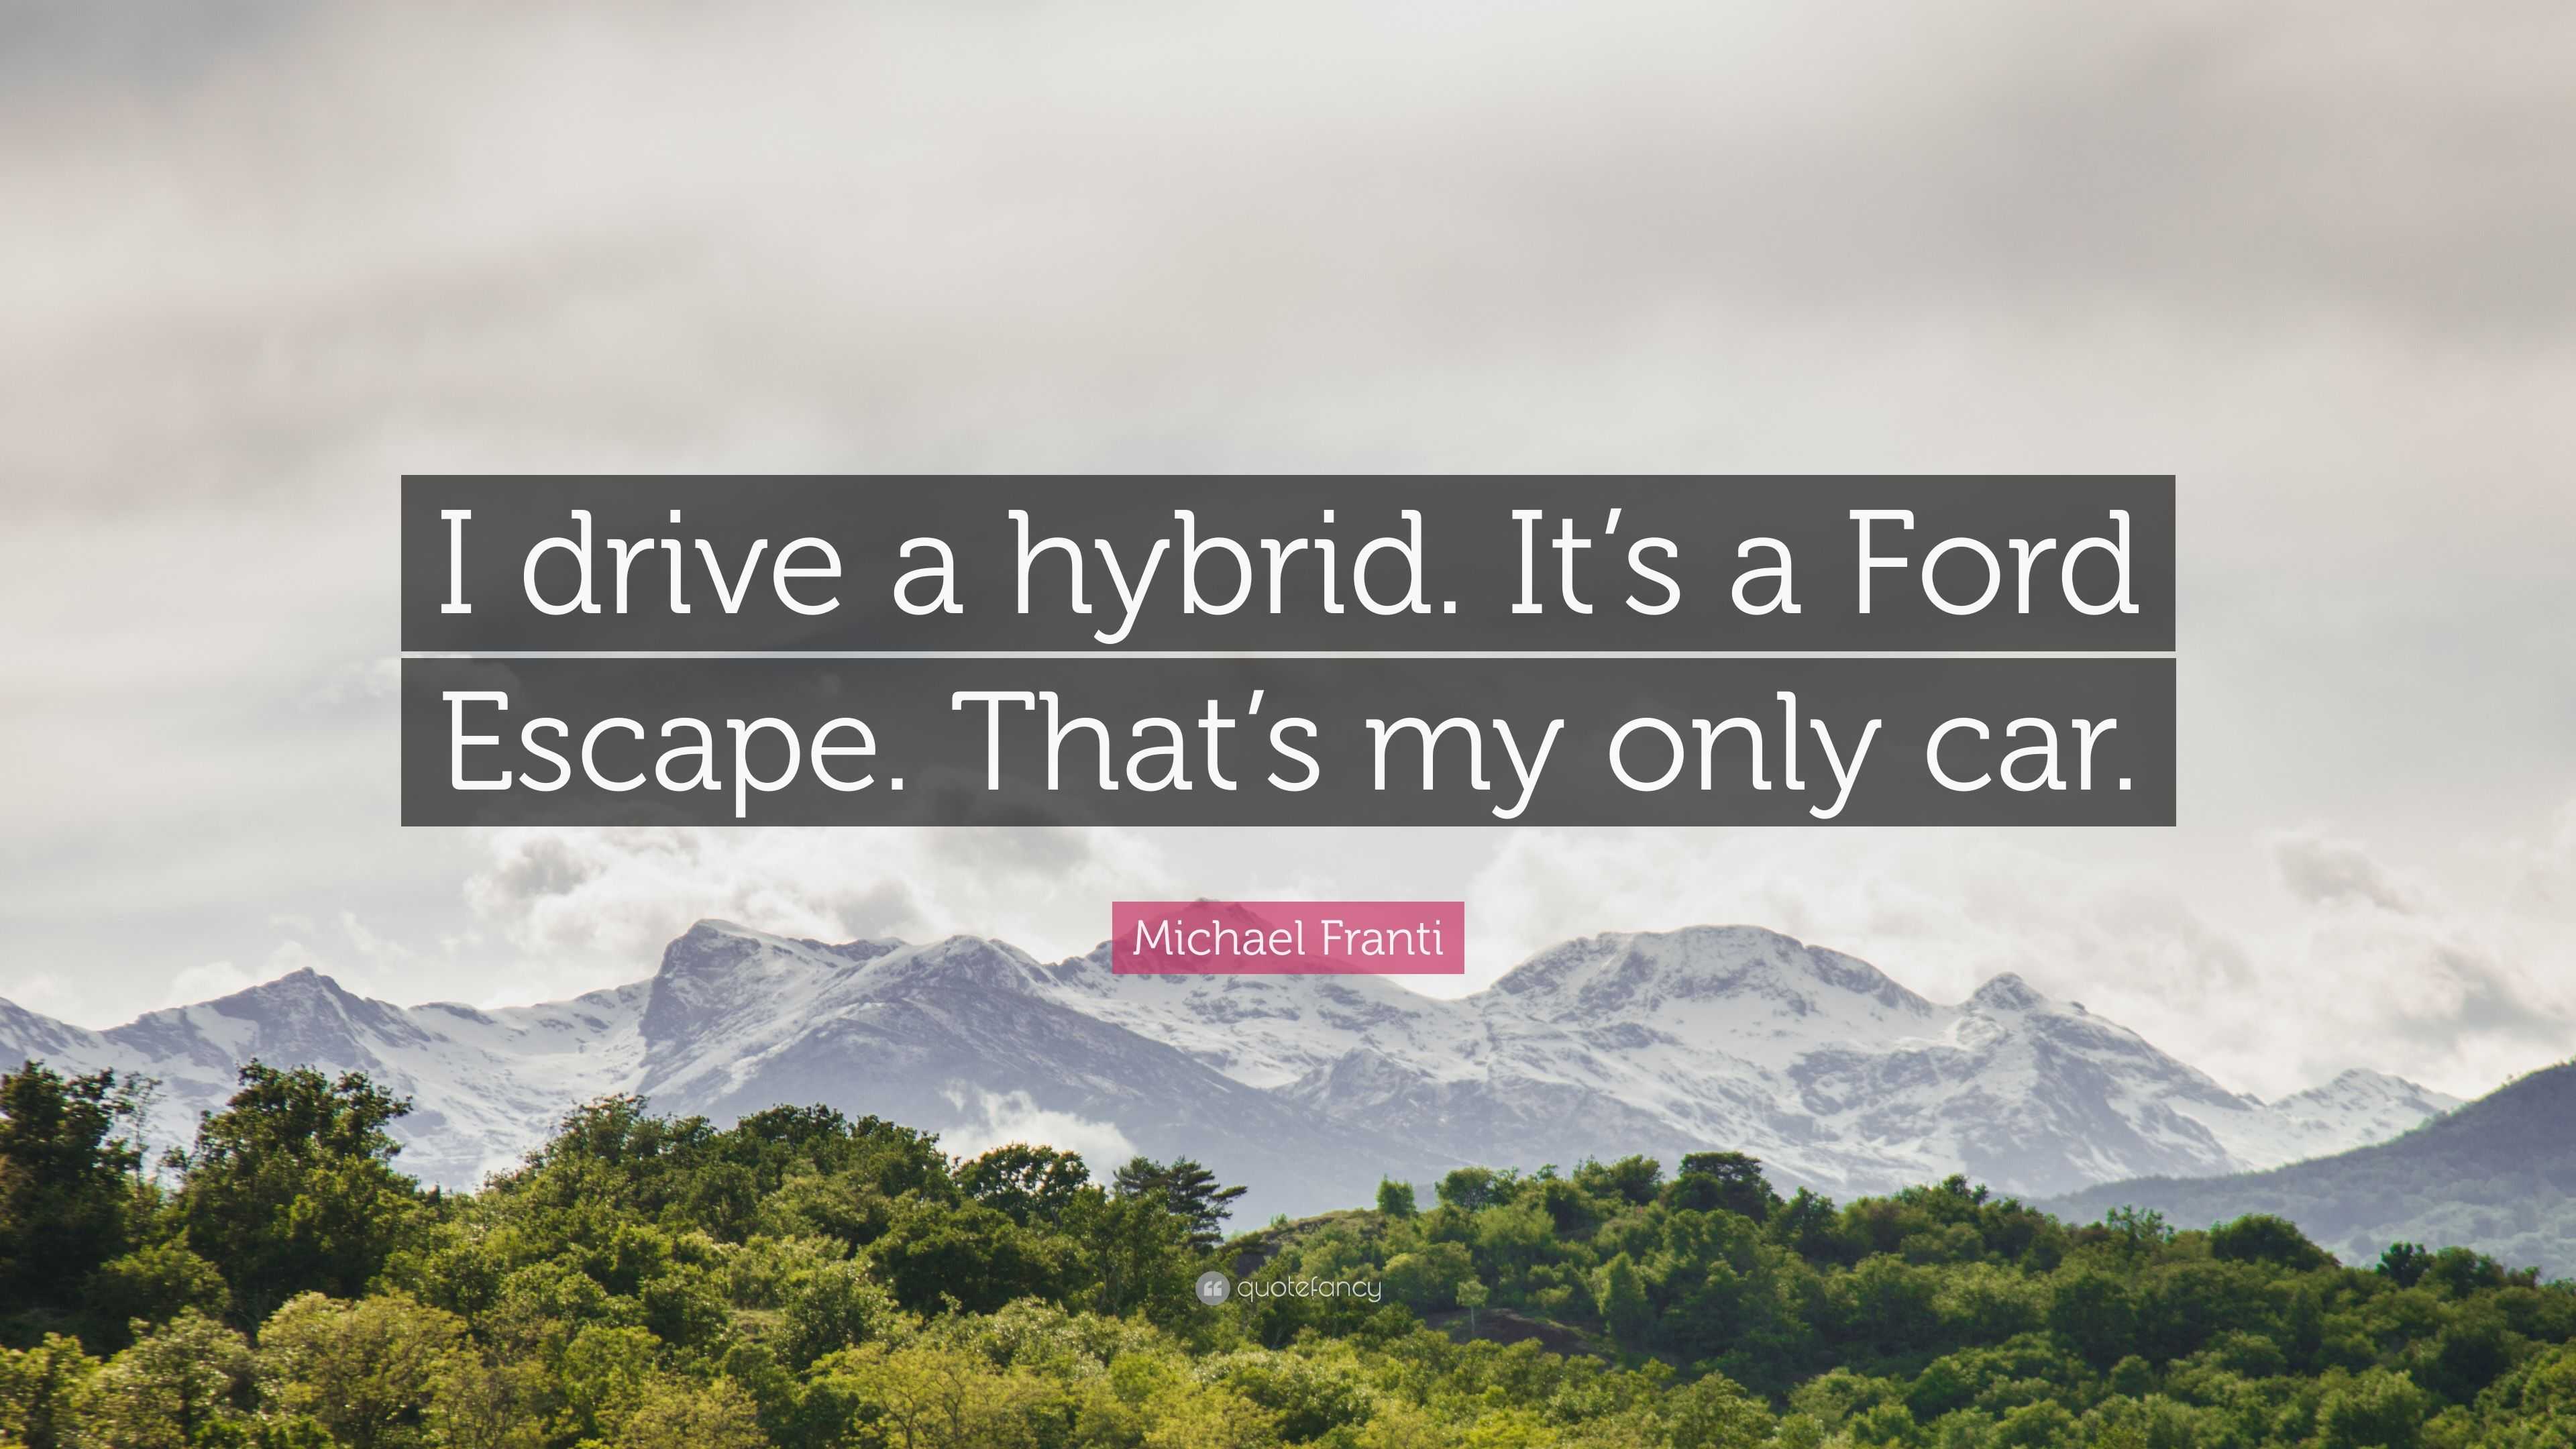 Michael Franti Quote: “I drive a hybrid. It's a Ford Escape. That's my only  car.”